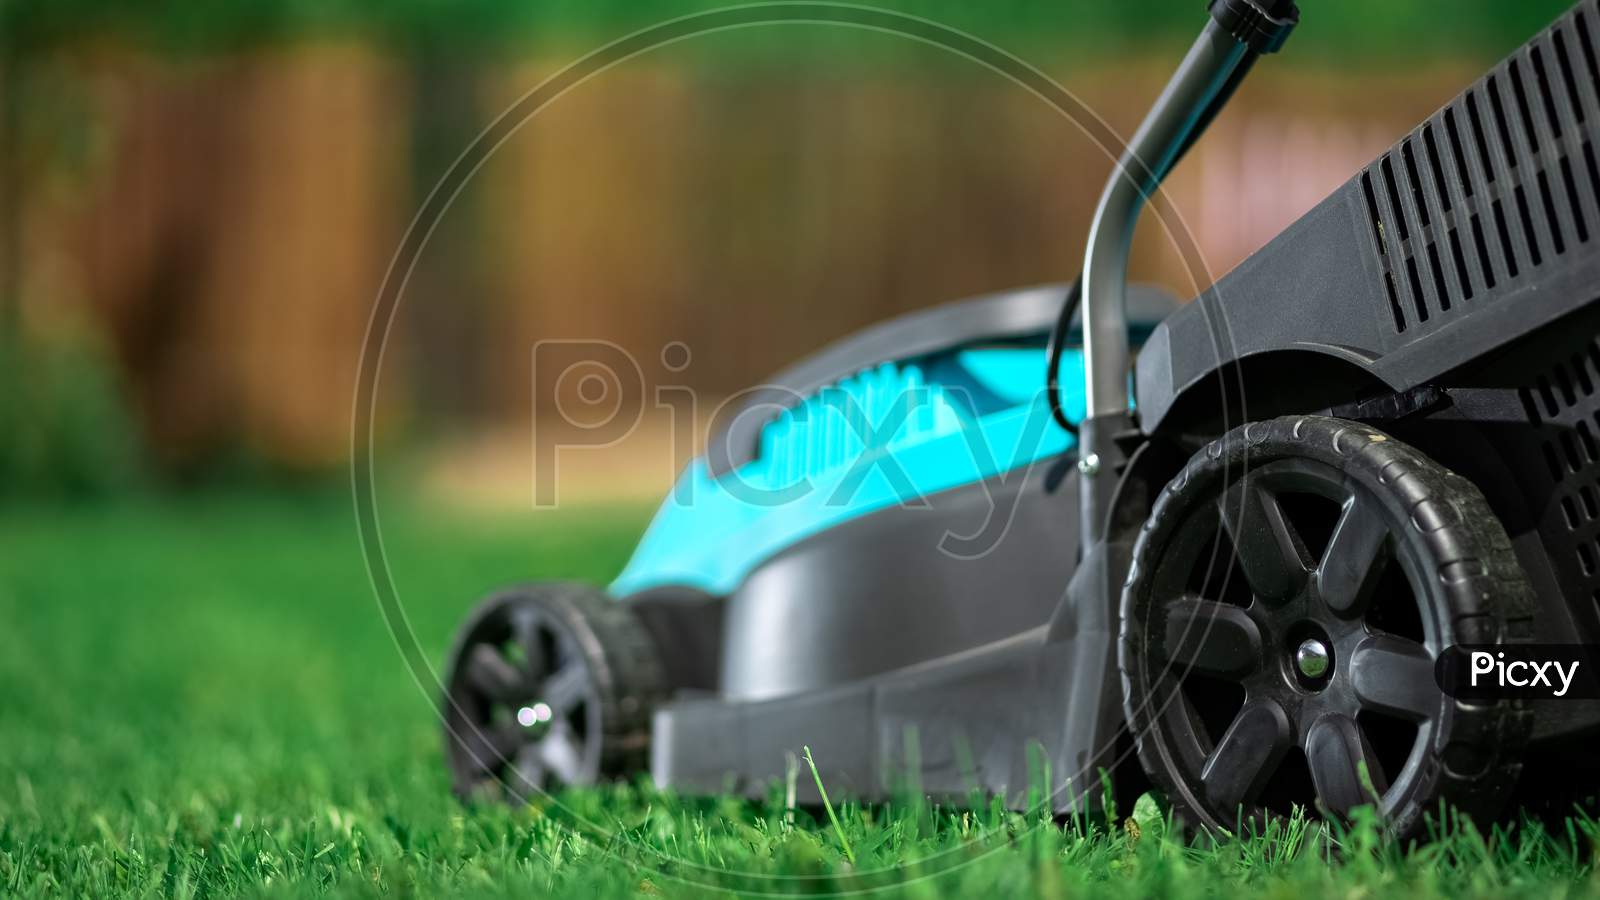 Lawn Grass Mowing. Worker Cutting Grass In A Green Yard. A Man With An Electric Lawn Mower Mowing A Lawn. Gardener Pruning A Garden